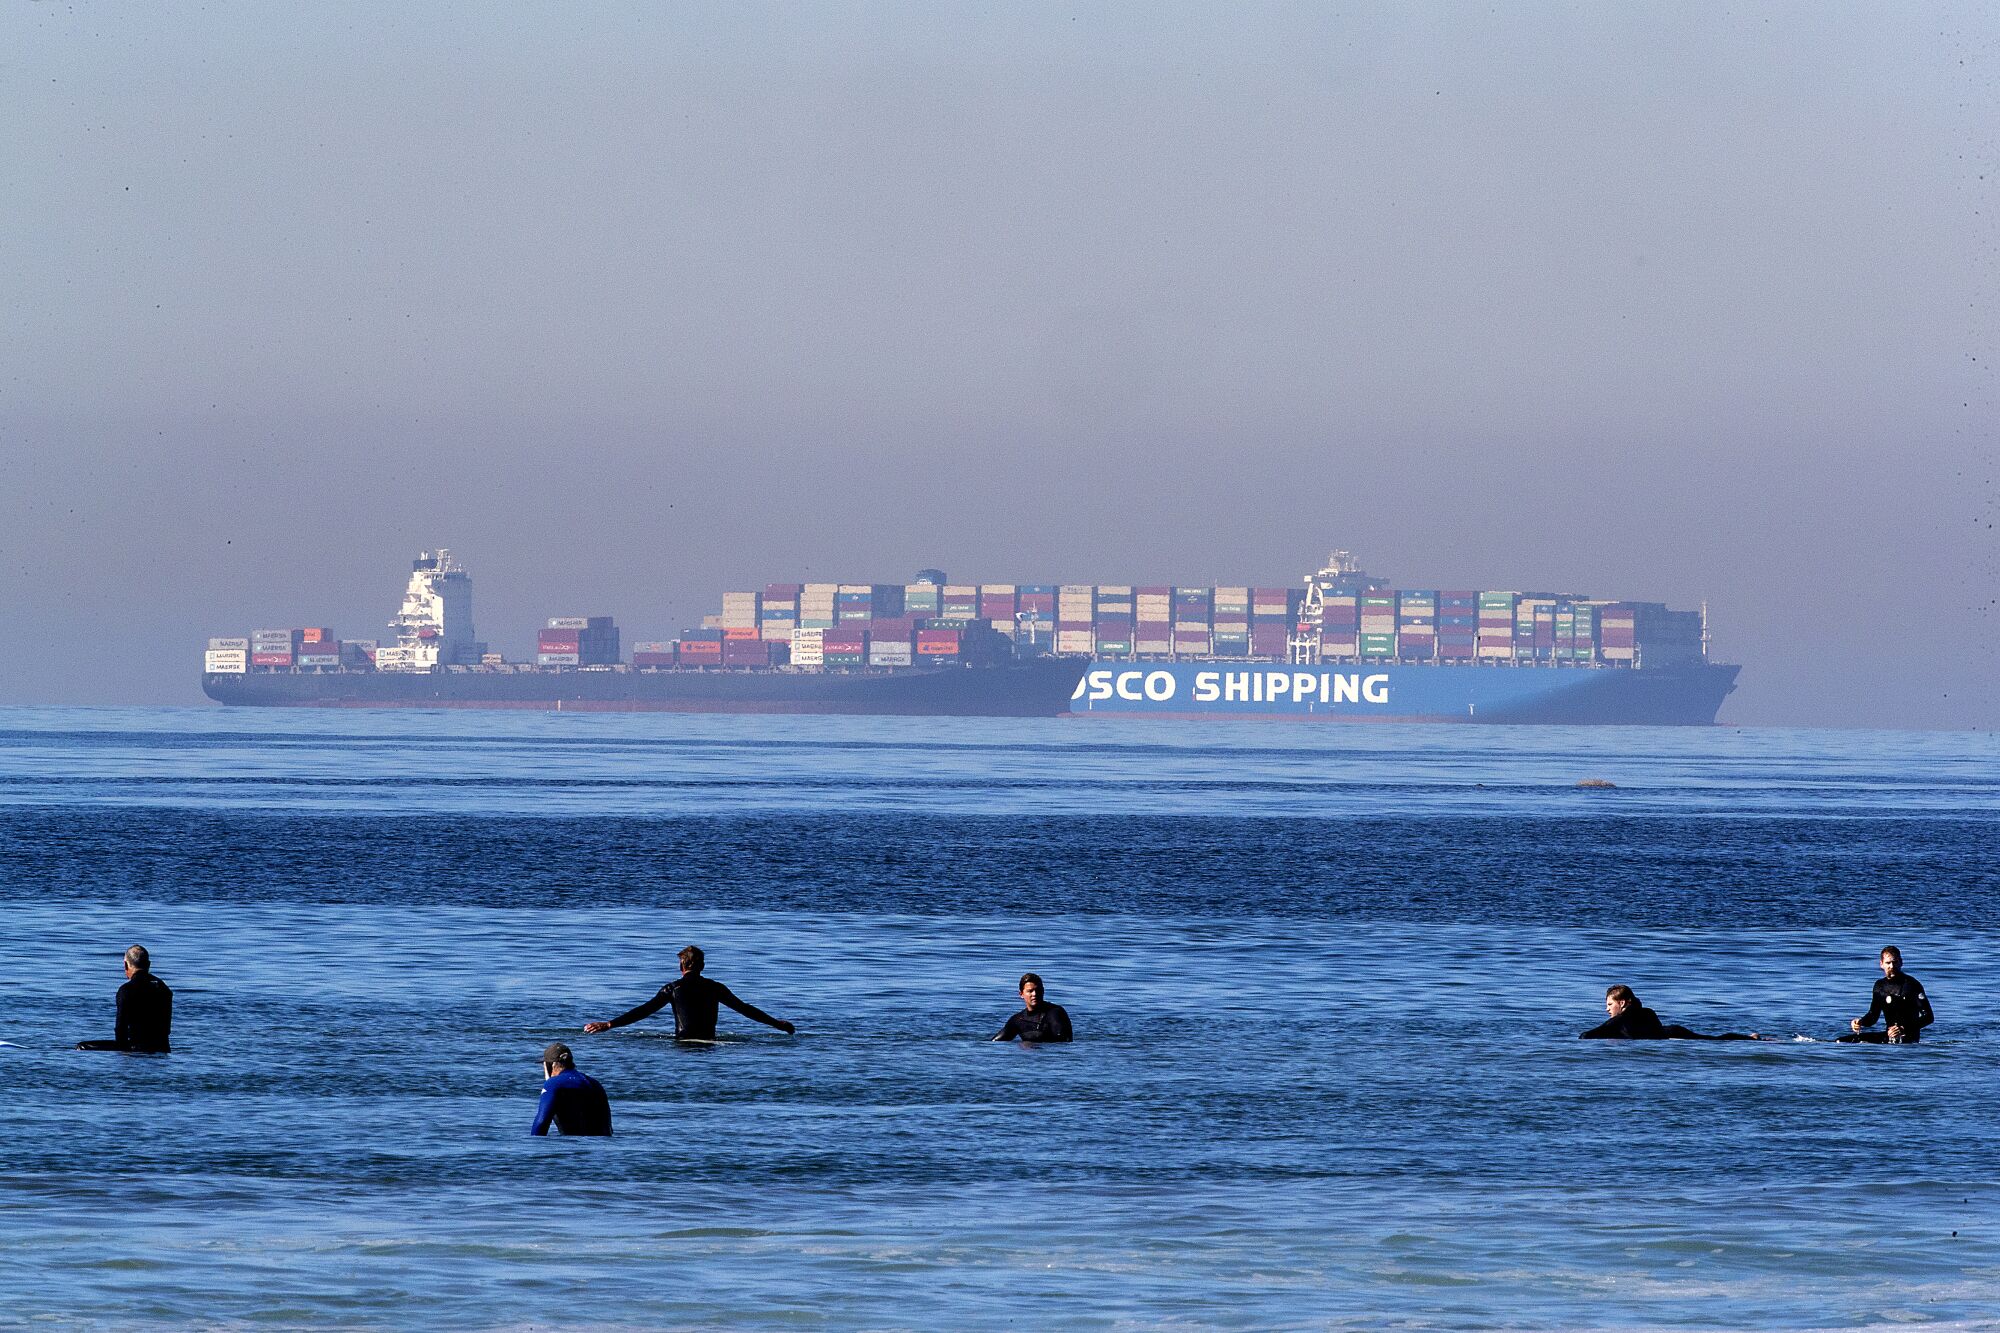 Surfers in black wetsuits bob in the water. In the background is a container ship. 